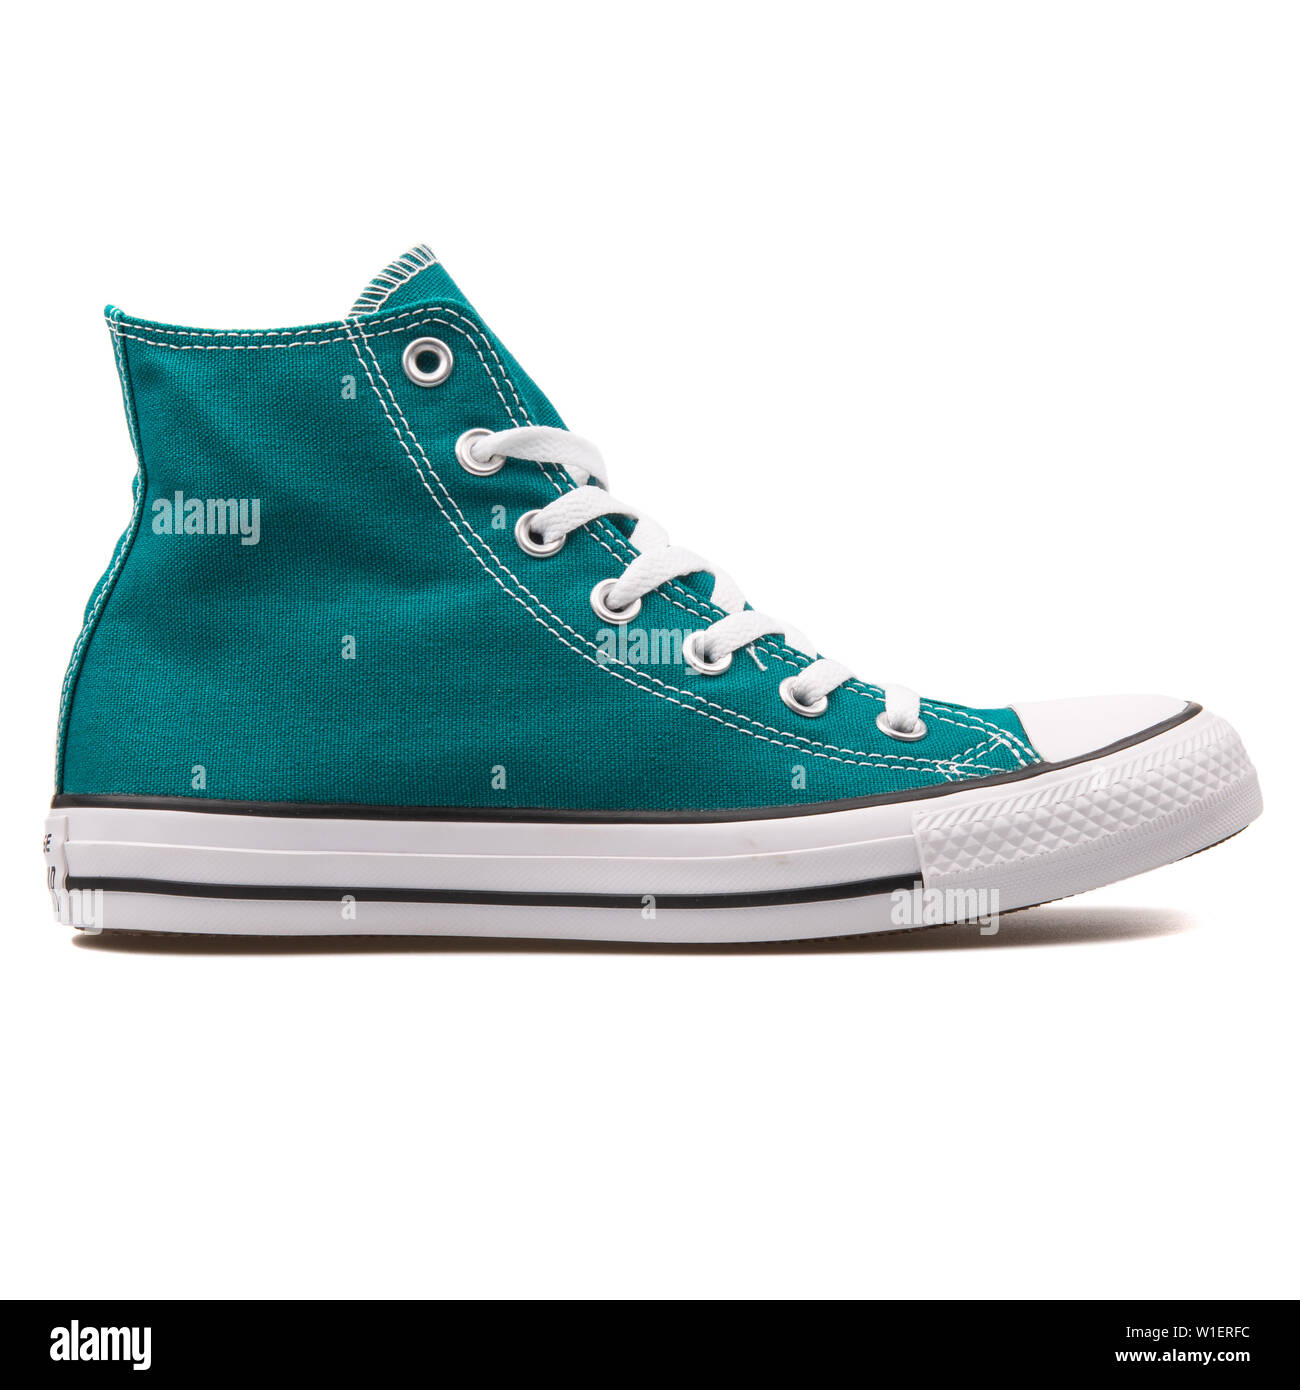 VIENNA, AUSTRIA - AUGUST 10, 2017: Converse Chuck Taylor All Star High  Rebel teal sneaker on white background Stock Photo - Alamy